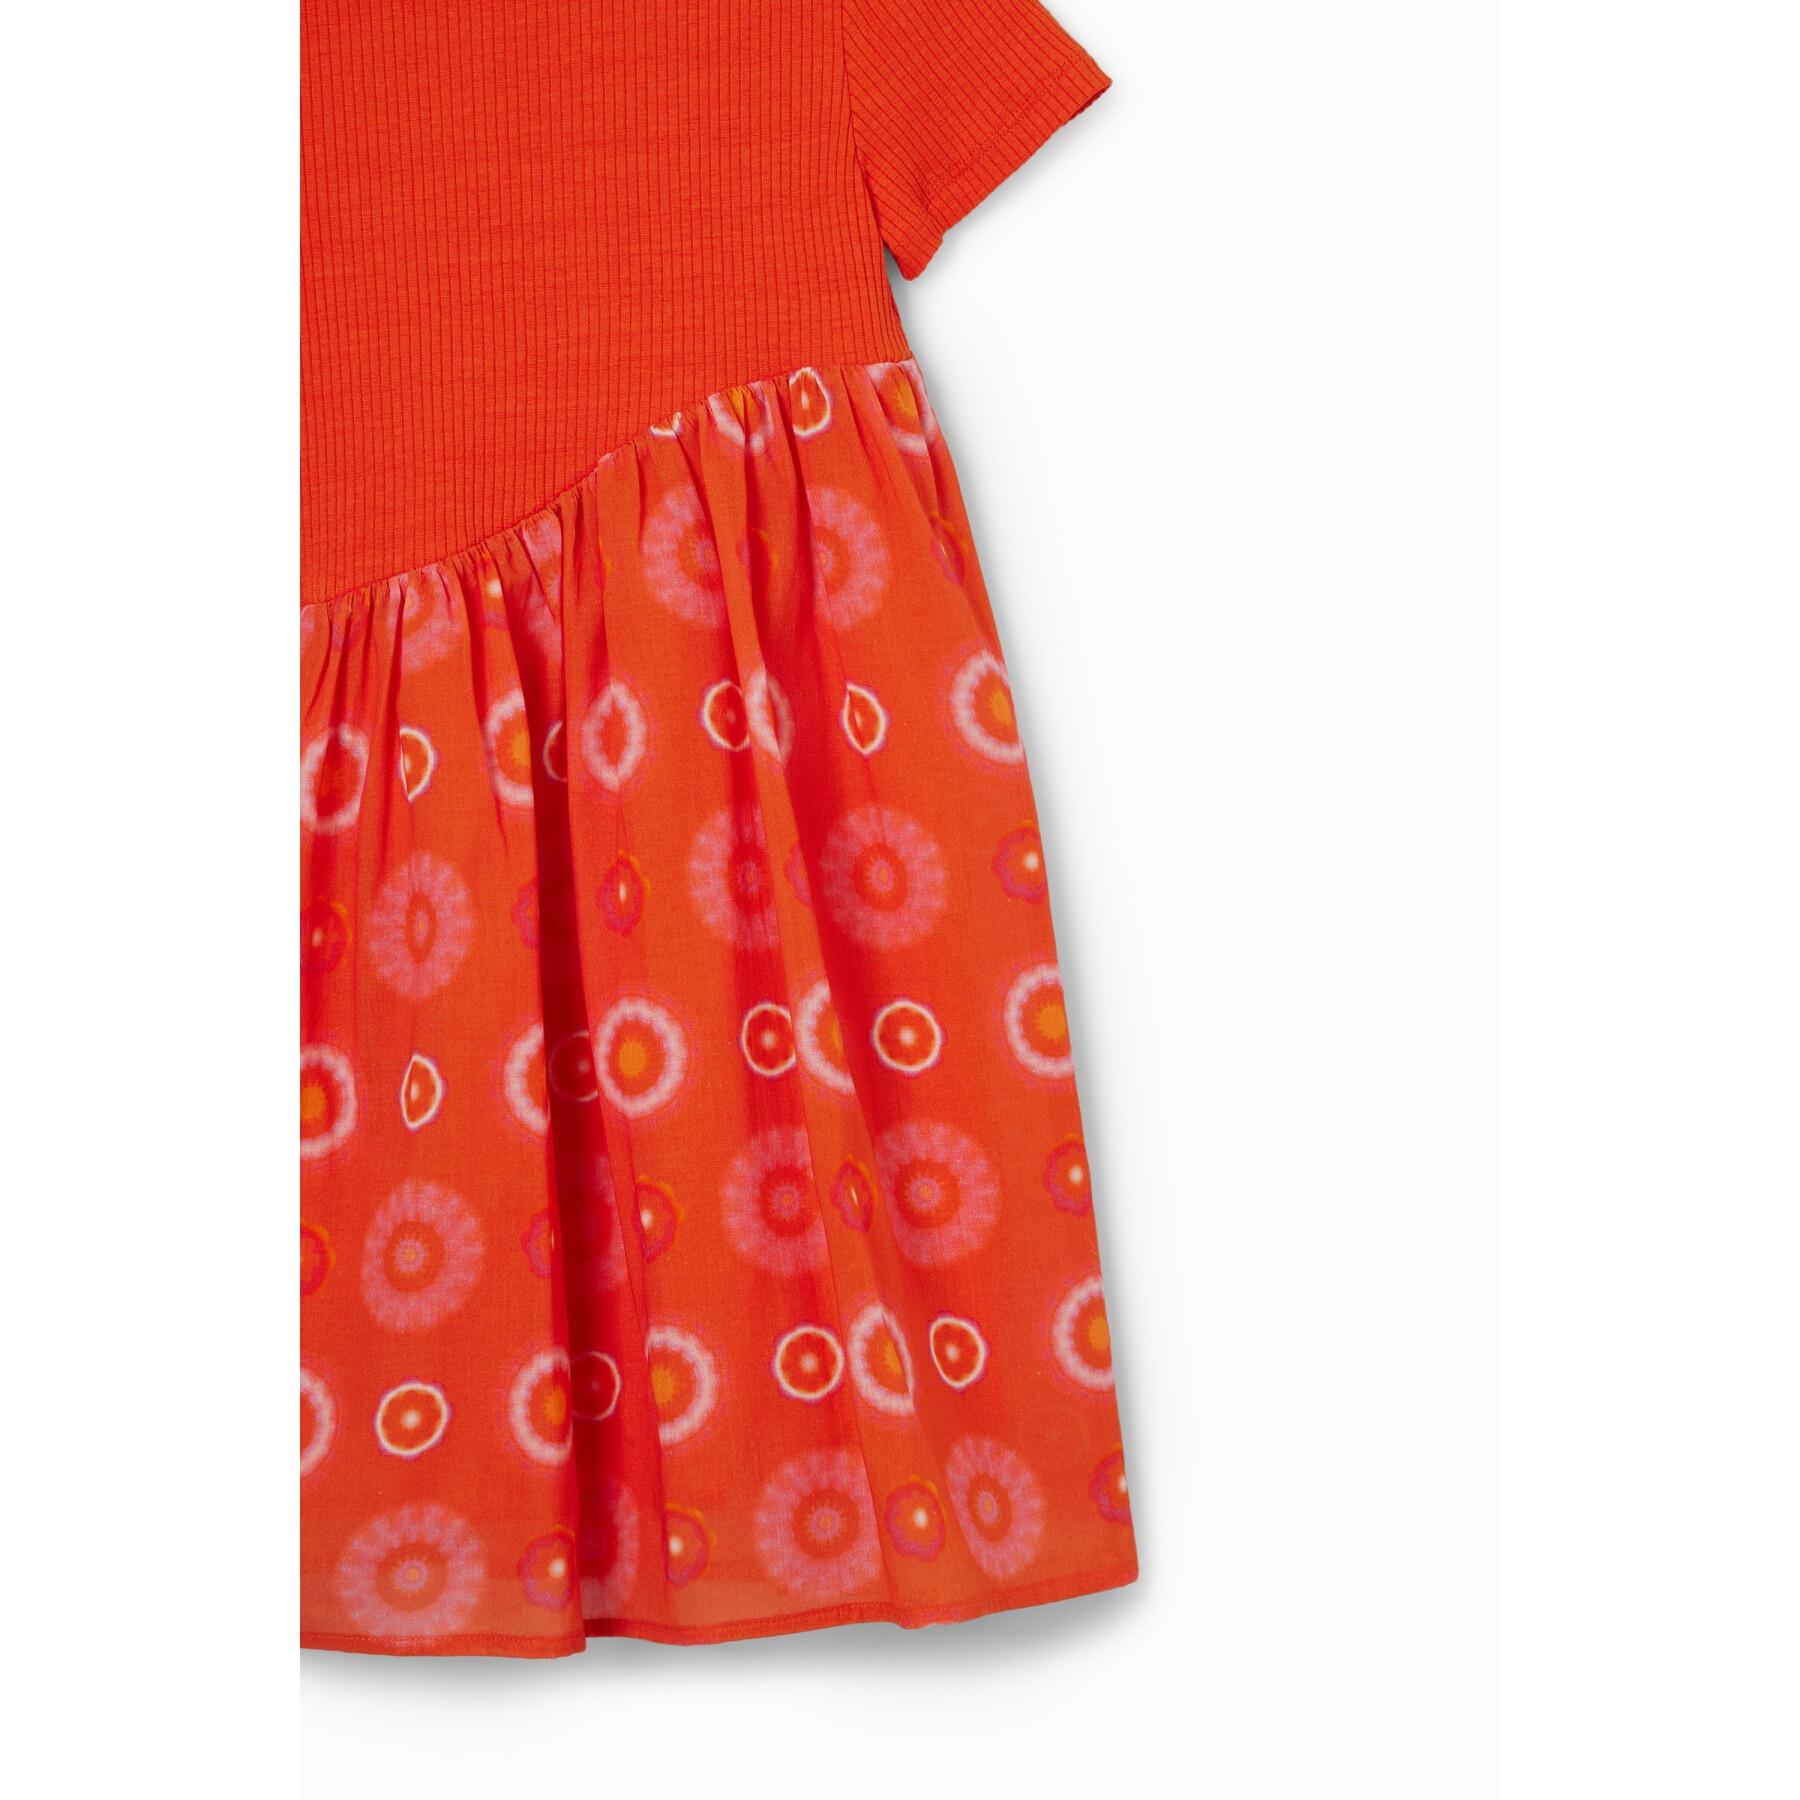 Robe fille Desigual Andy